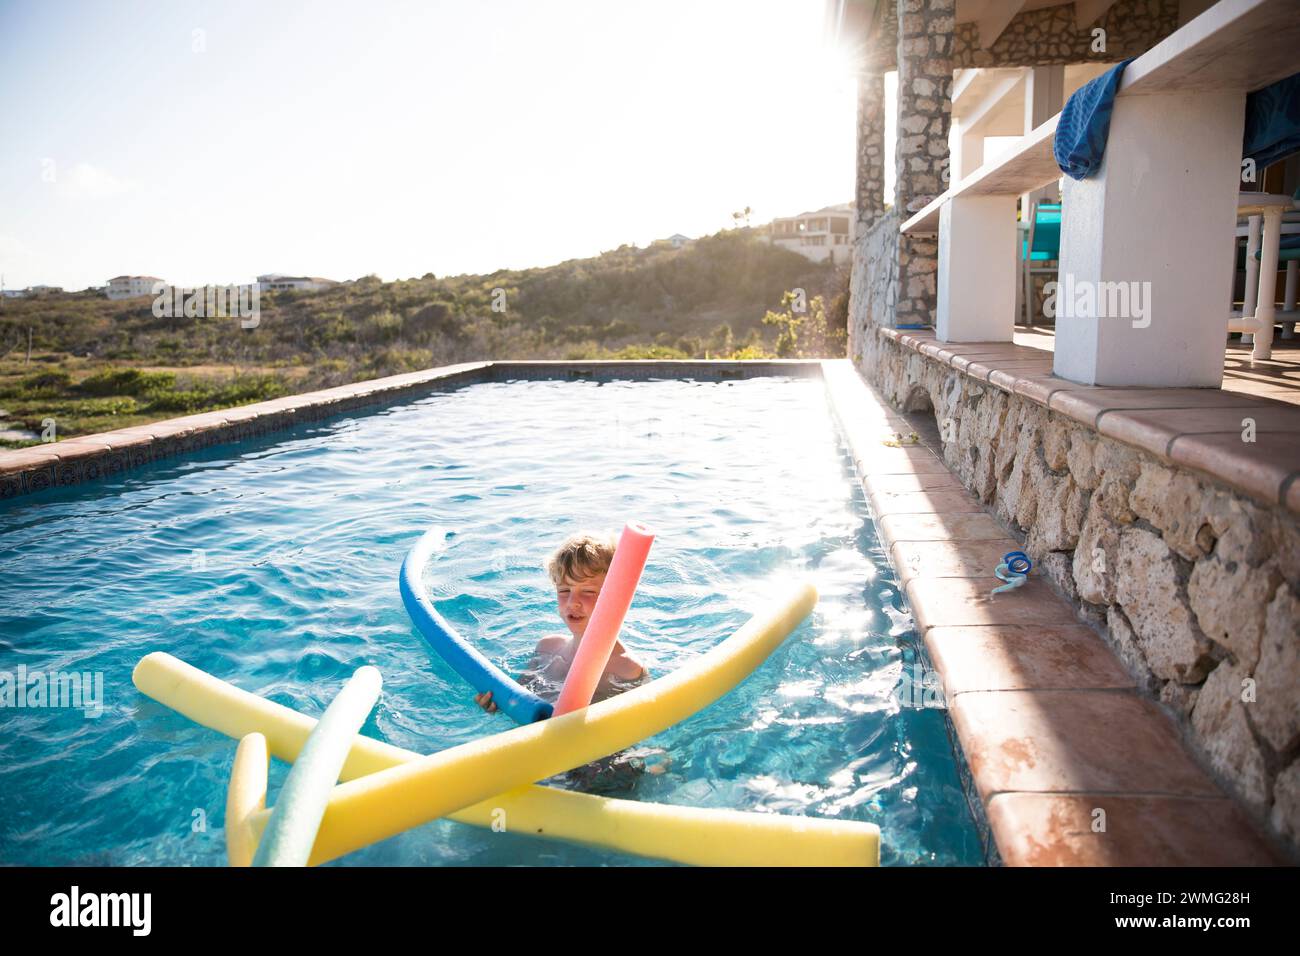 Young Boy With Pool Noodles, in Pool Overlooking Caribbean Beach Stock Photo